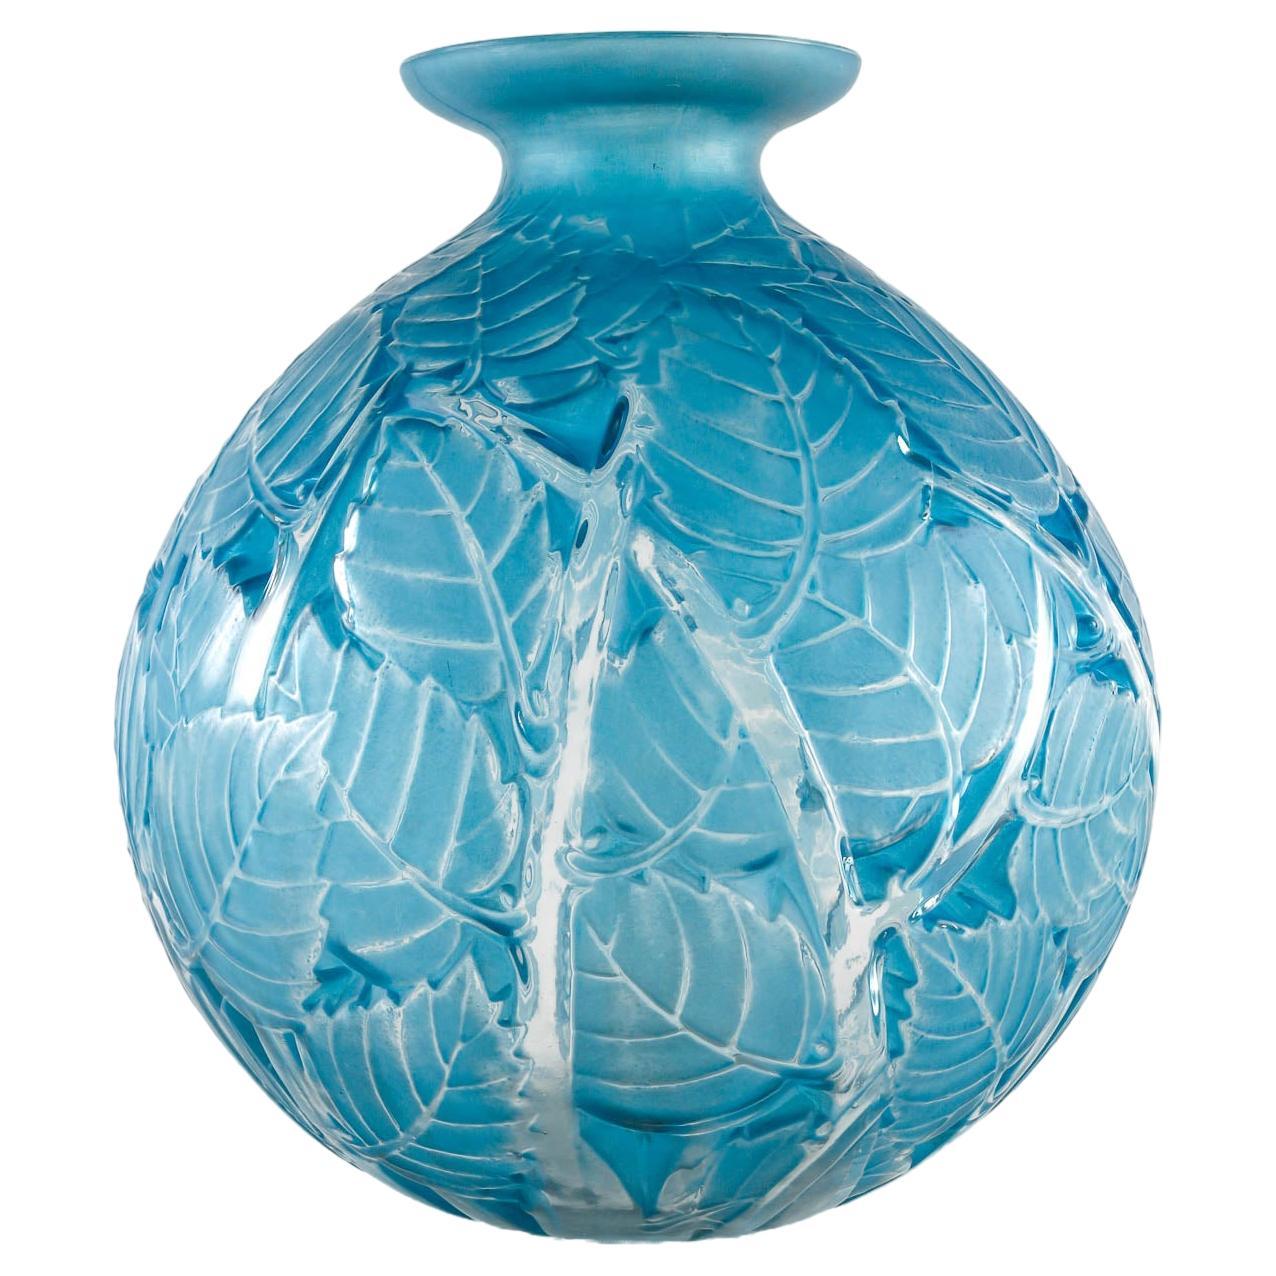 1929 René Lalique Vase Milan Frosted Glass with Electric Blue Patina